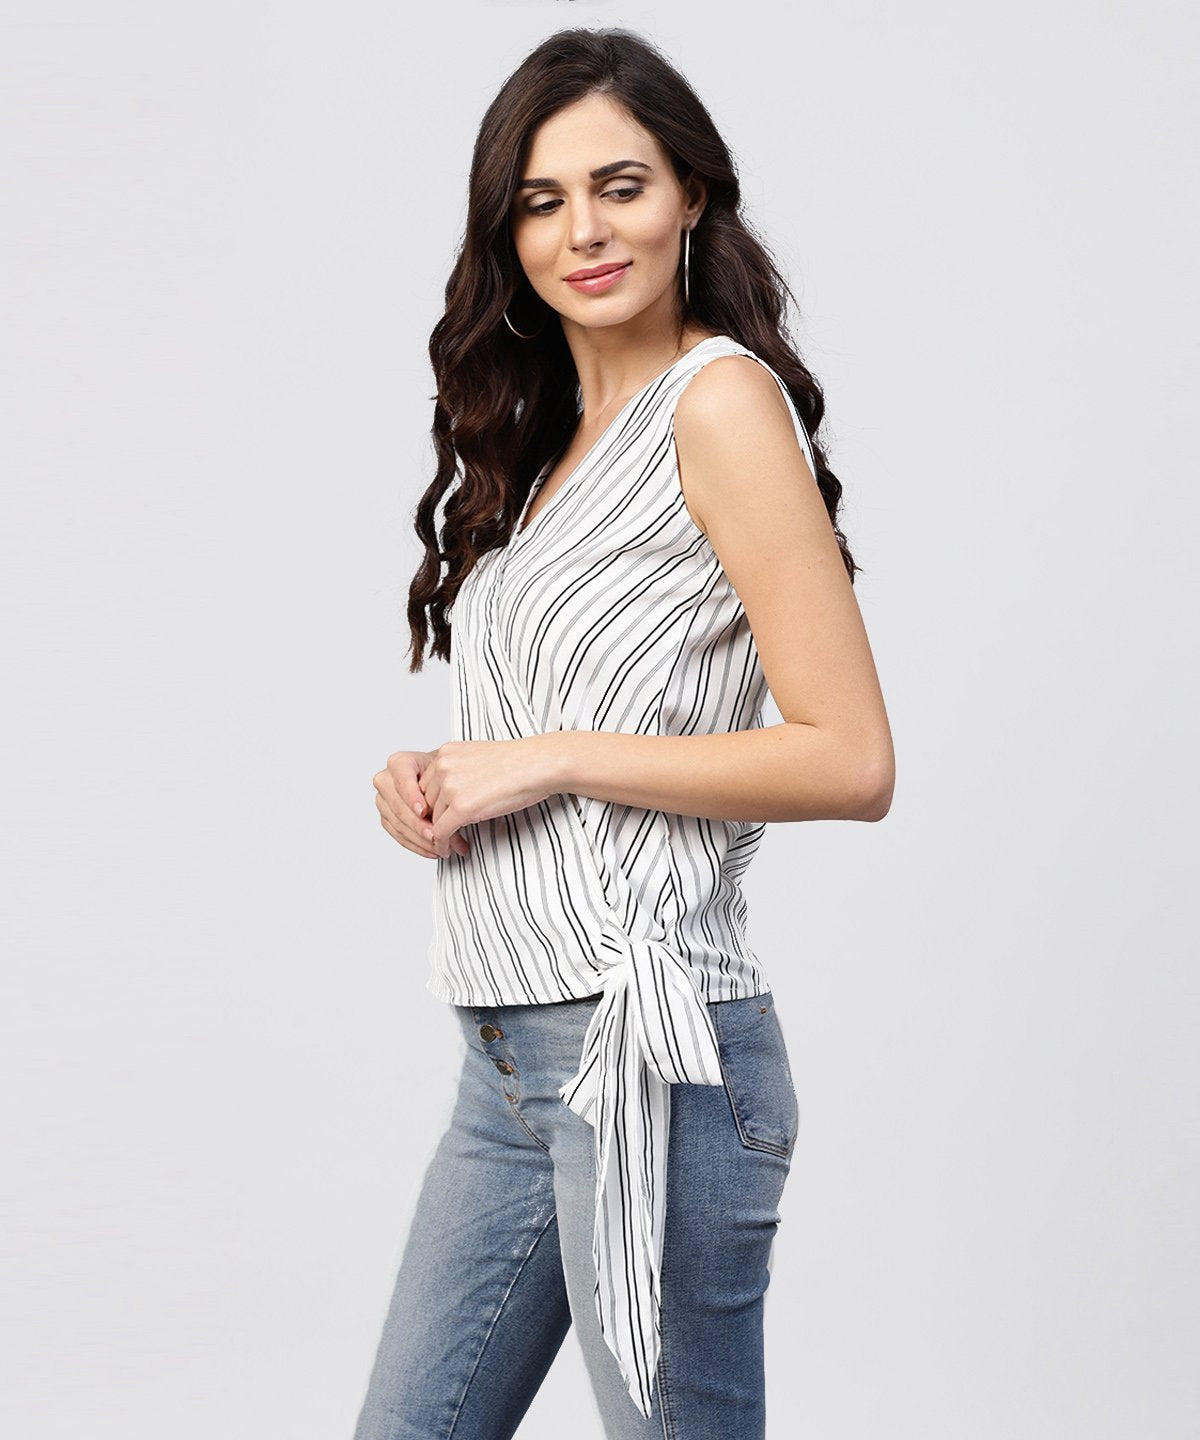 Women's White And Grey Striped Cotton Top With V-Neck - Nayo Clothing